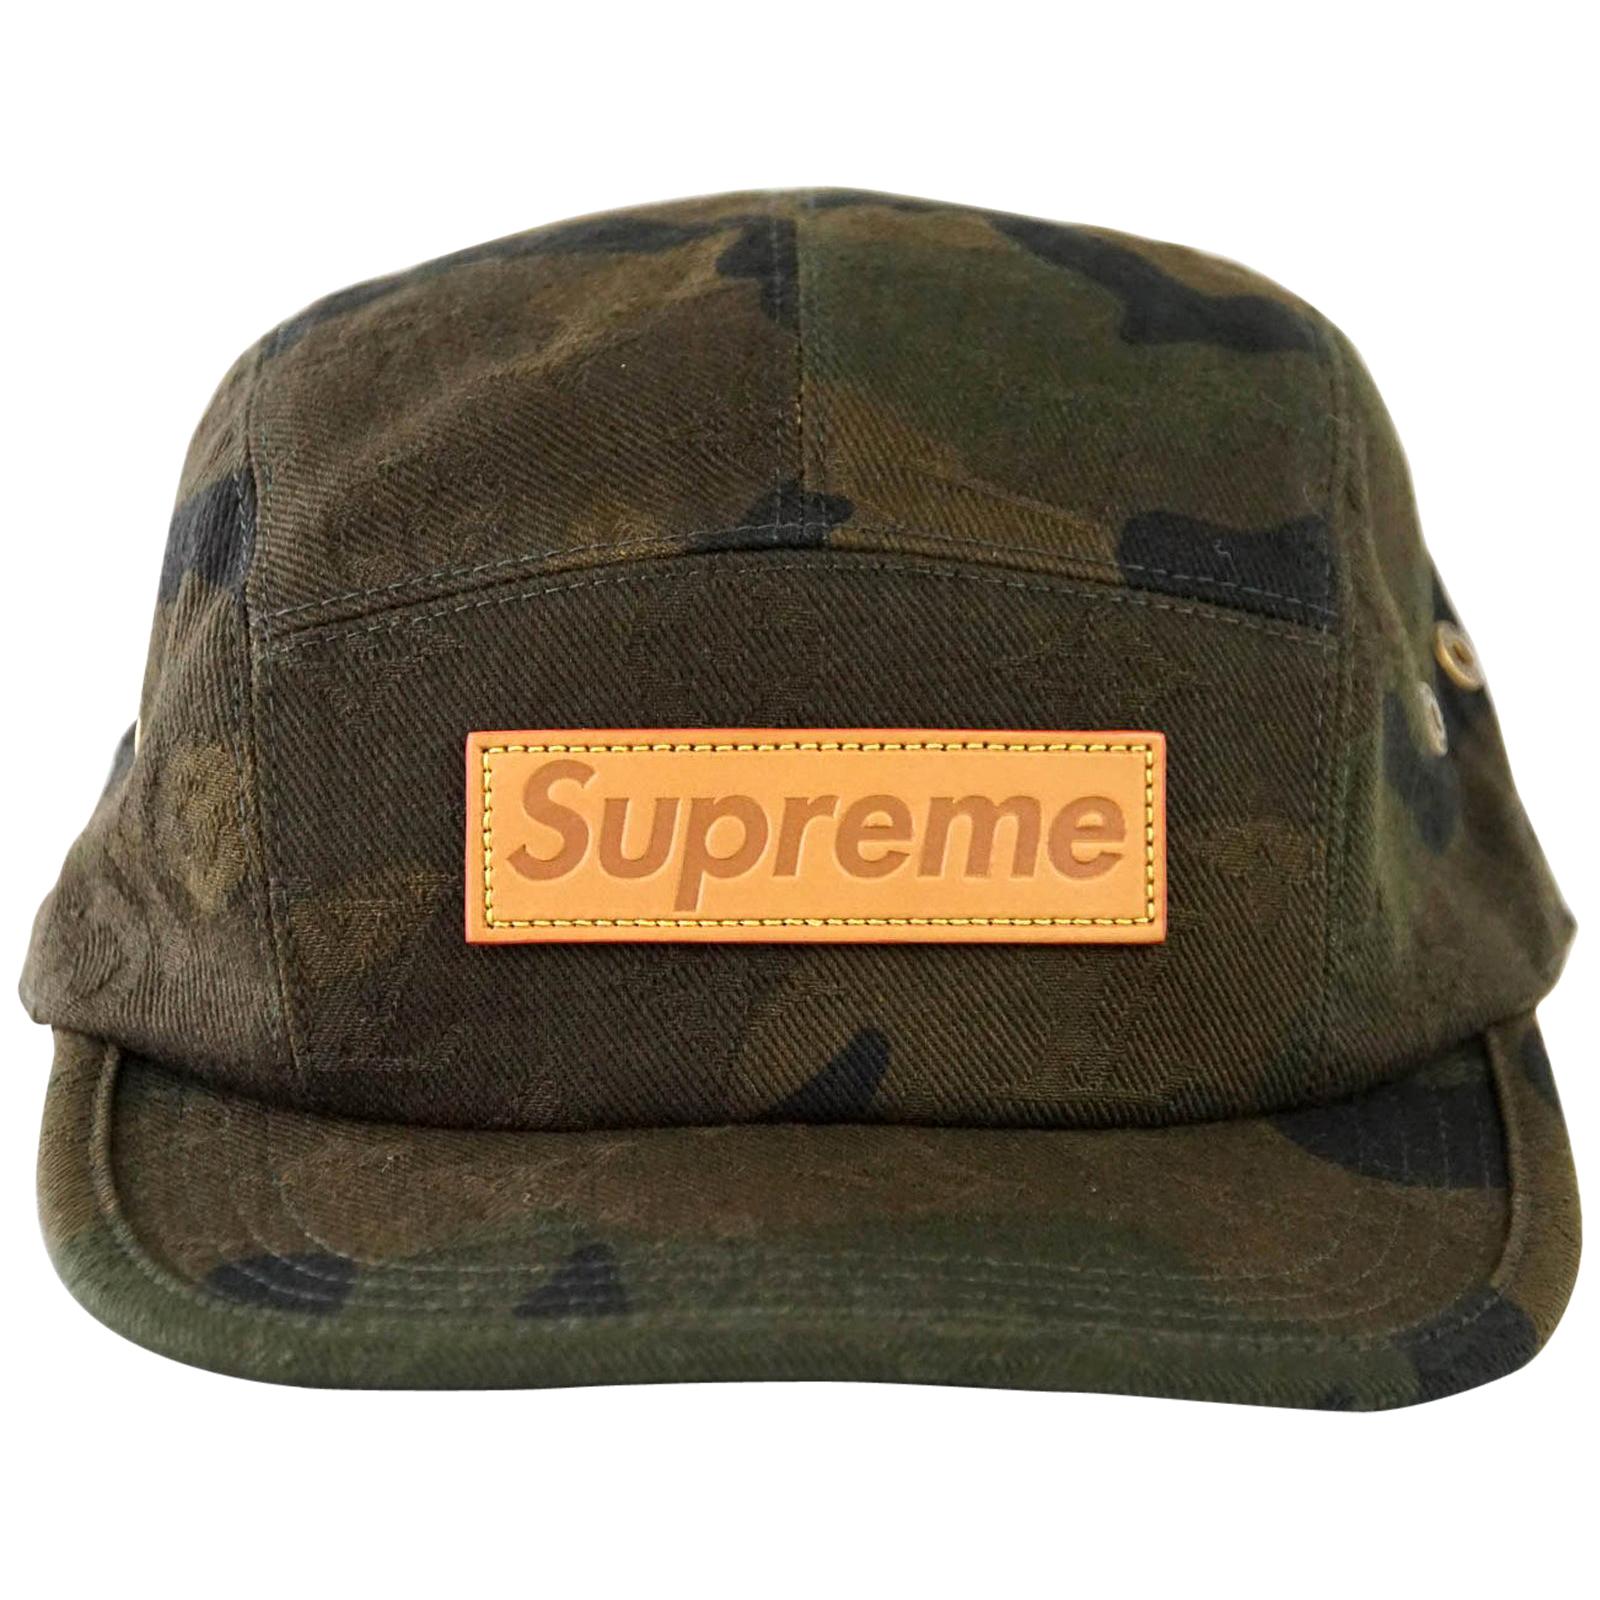 supreme and louis vuitton hat